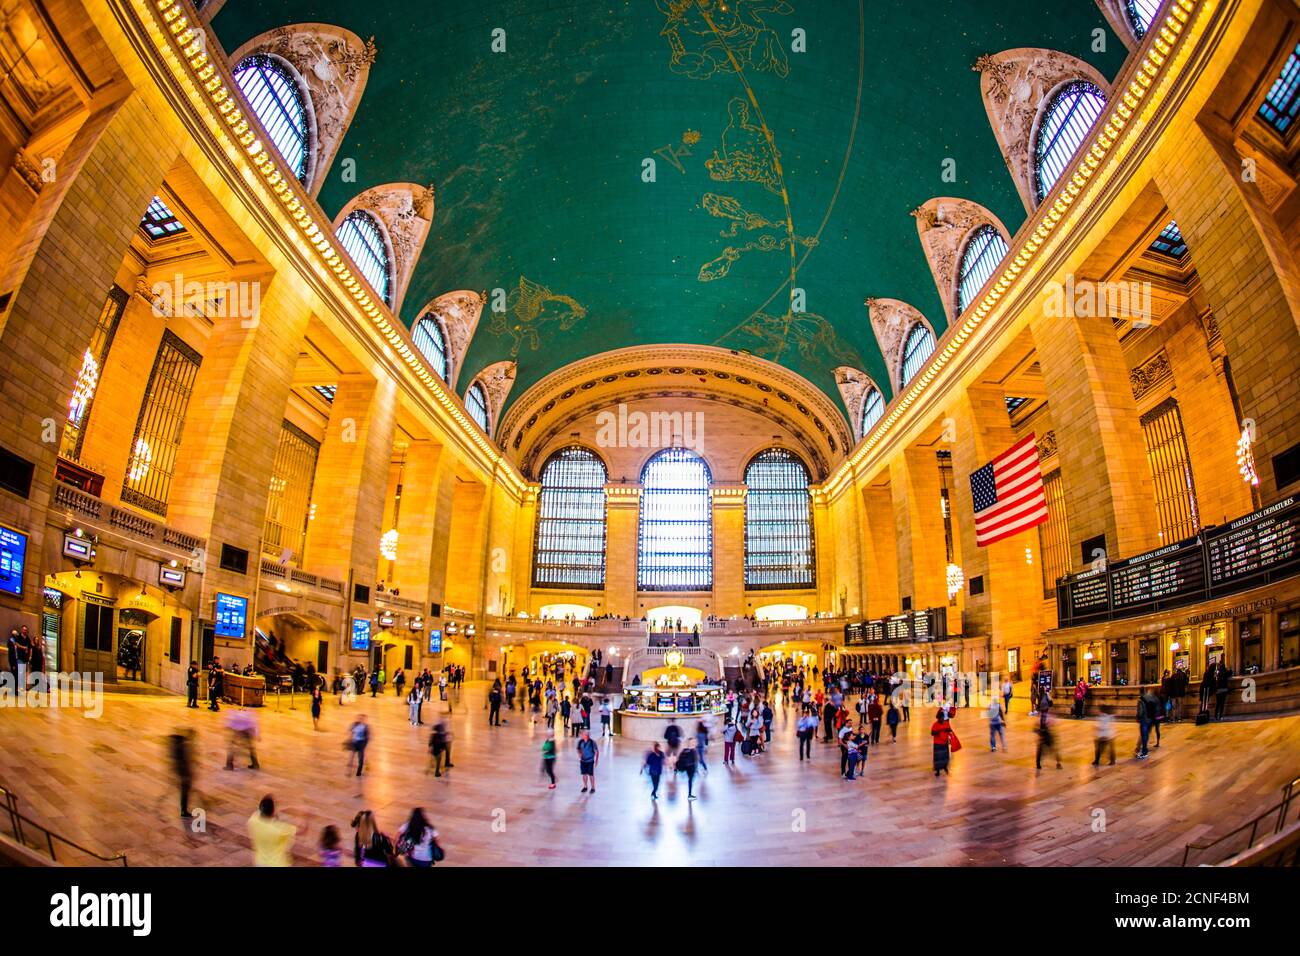 Grand Central Station (New York, USA) Stock Photo